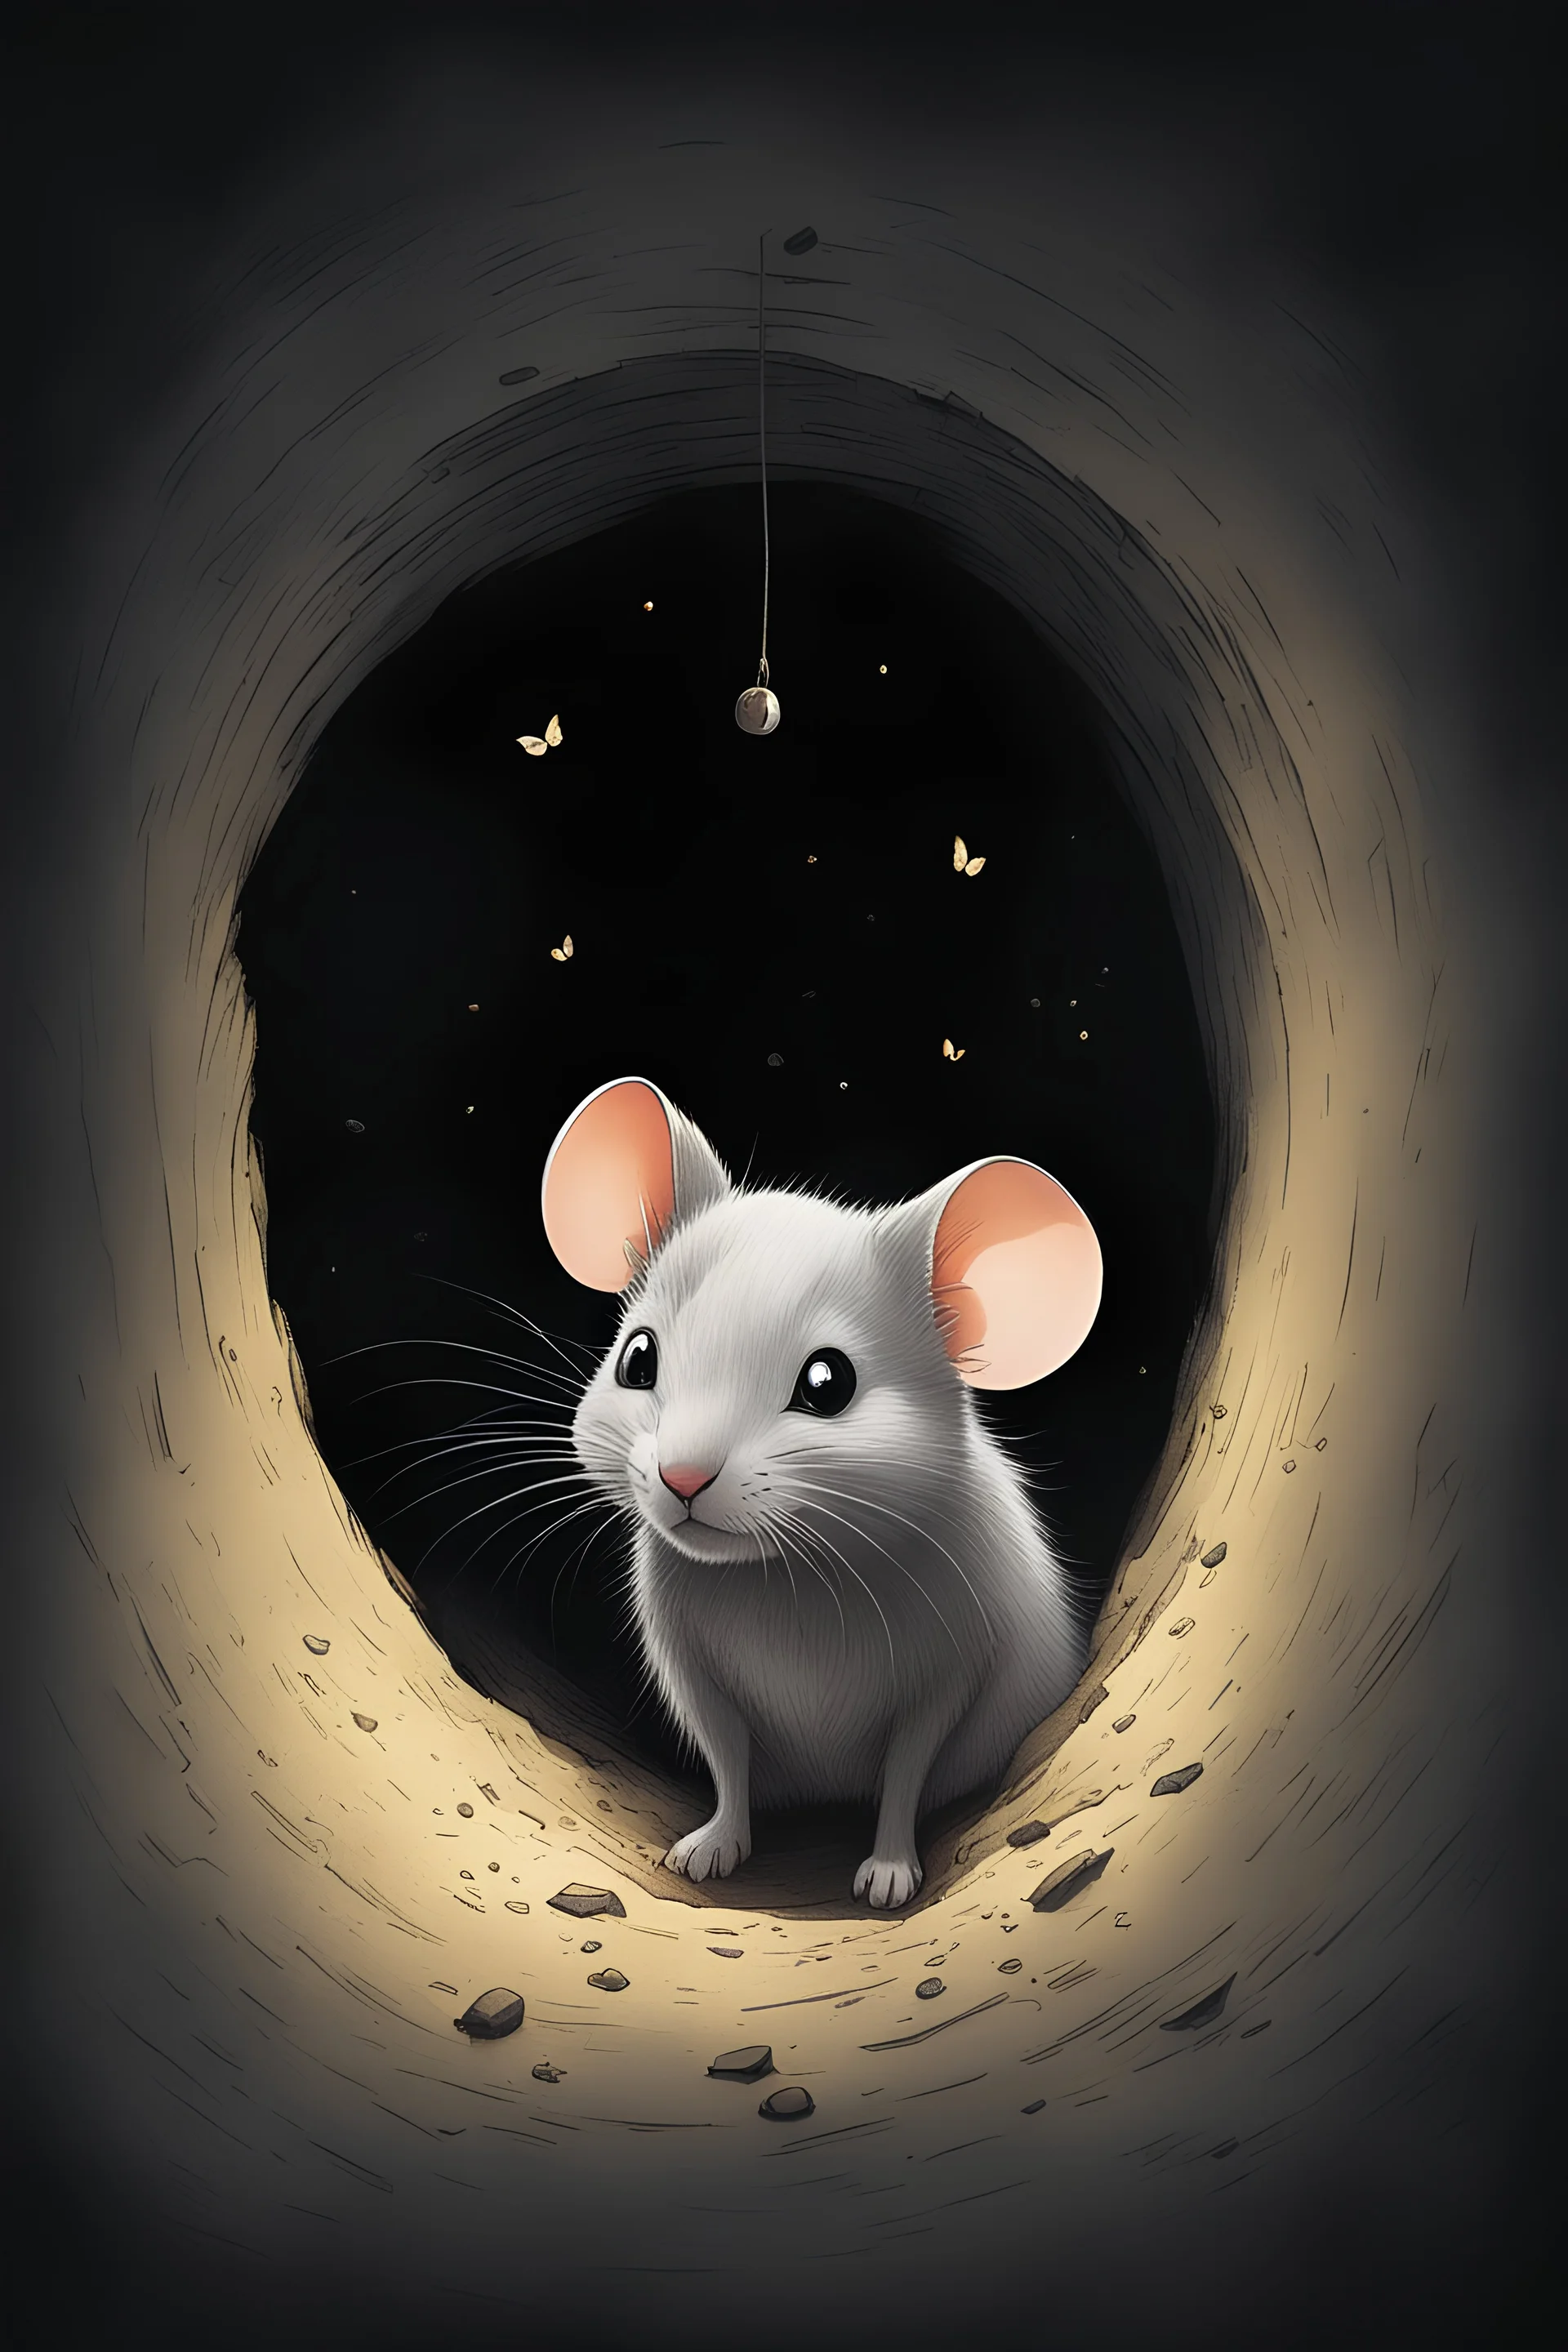 The story begins with a mouse, a tiny creature trapped inside a hole, its heart pounding with a mixture of dread and anticipation. Outside, a giant cat lurks, its eyes glinting with an insidious hunger. The mouse can hear the low rumble of its growls, a chilling reminder of the imminent danger. Fear permeates the air, thickening with every passing moment. As the mouse peeks out from its sanctuary, it catches a glimpse of the monstrous feline, its massive paws ready to pounce. Every instinct scre